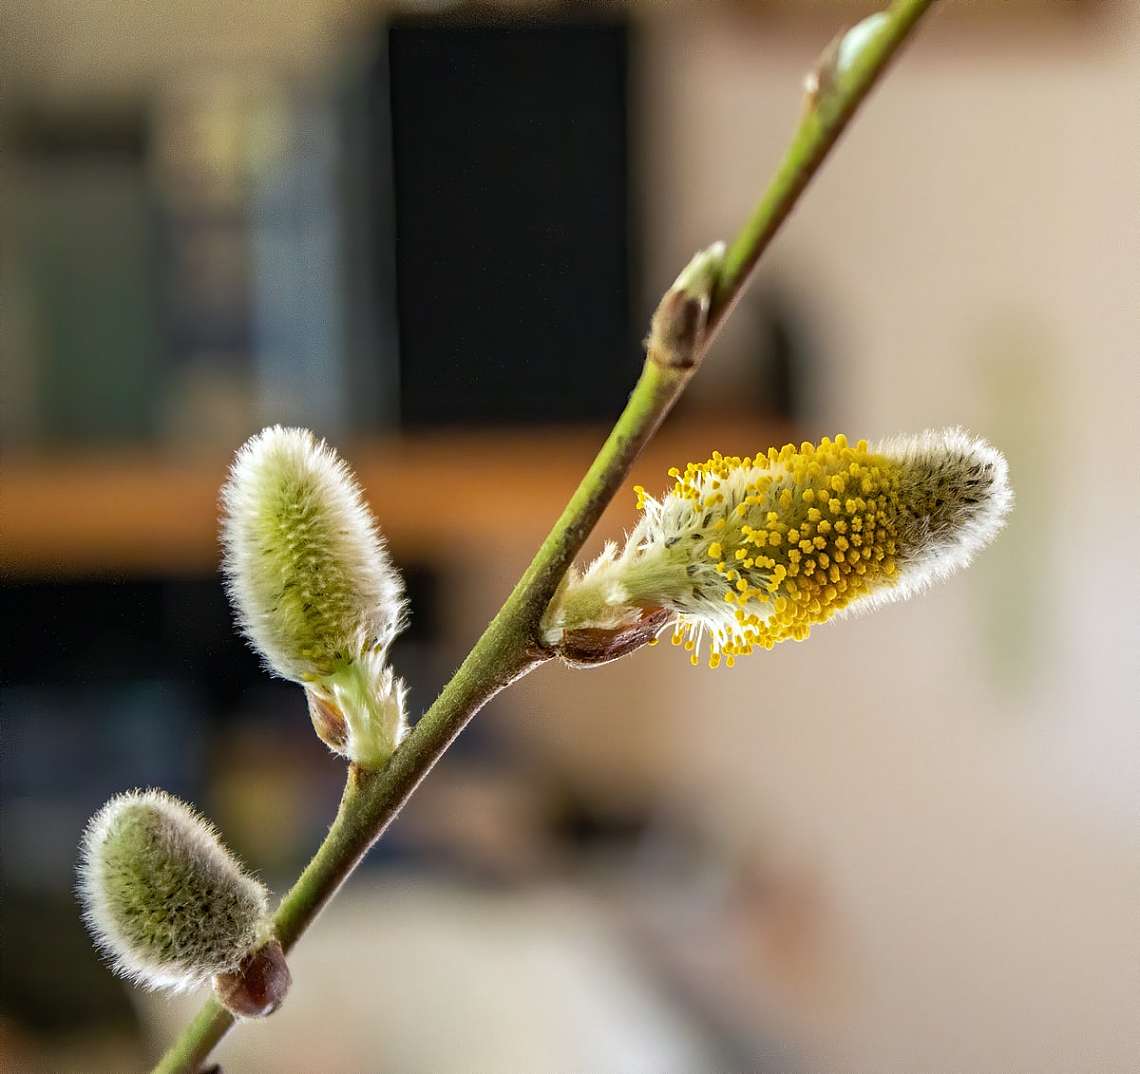 A catkin grows up!